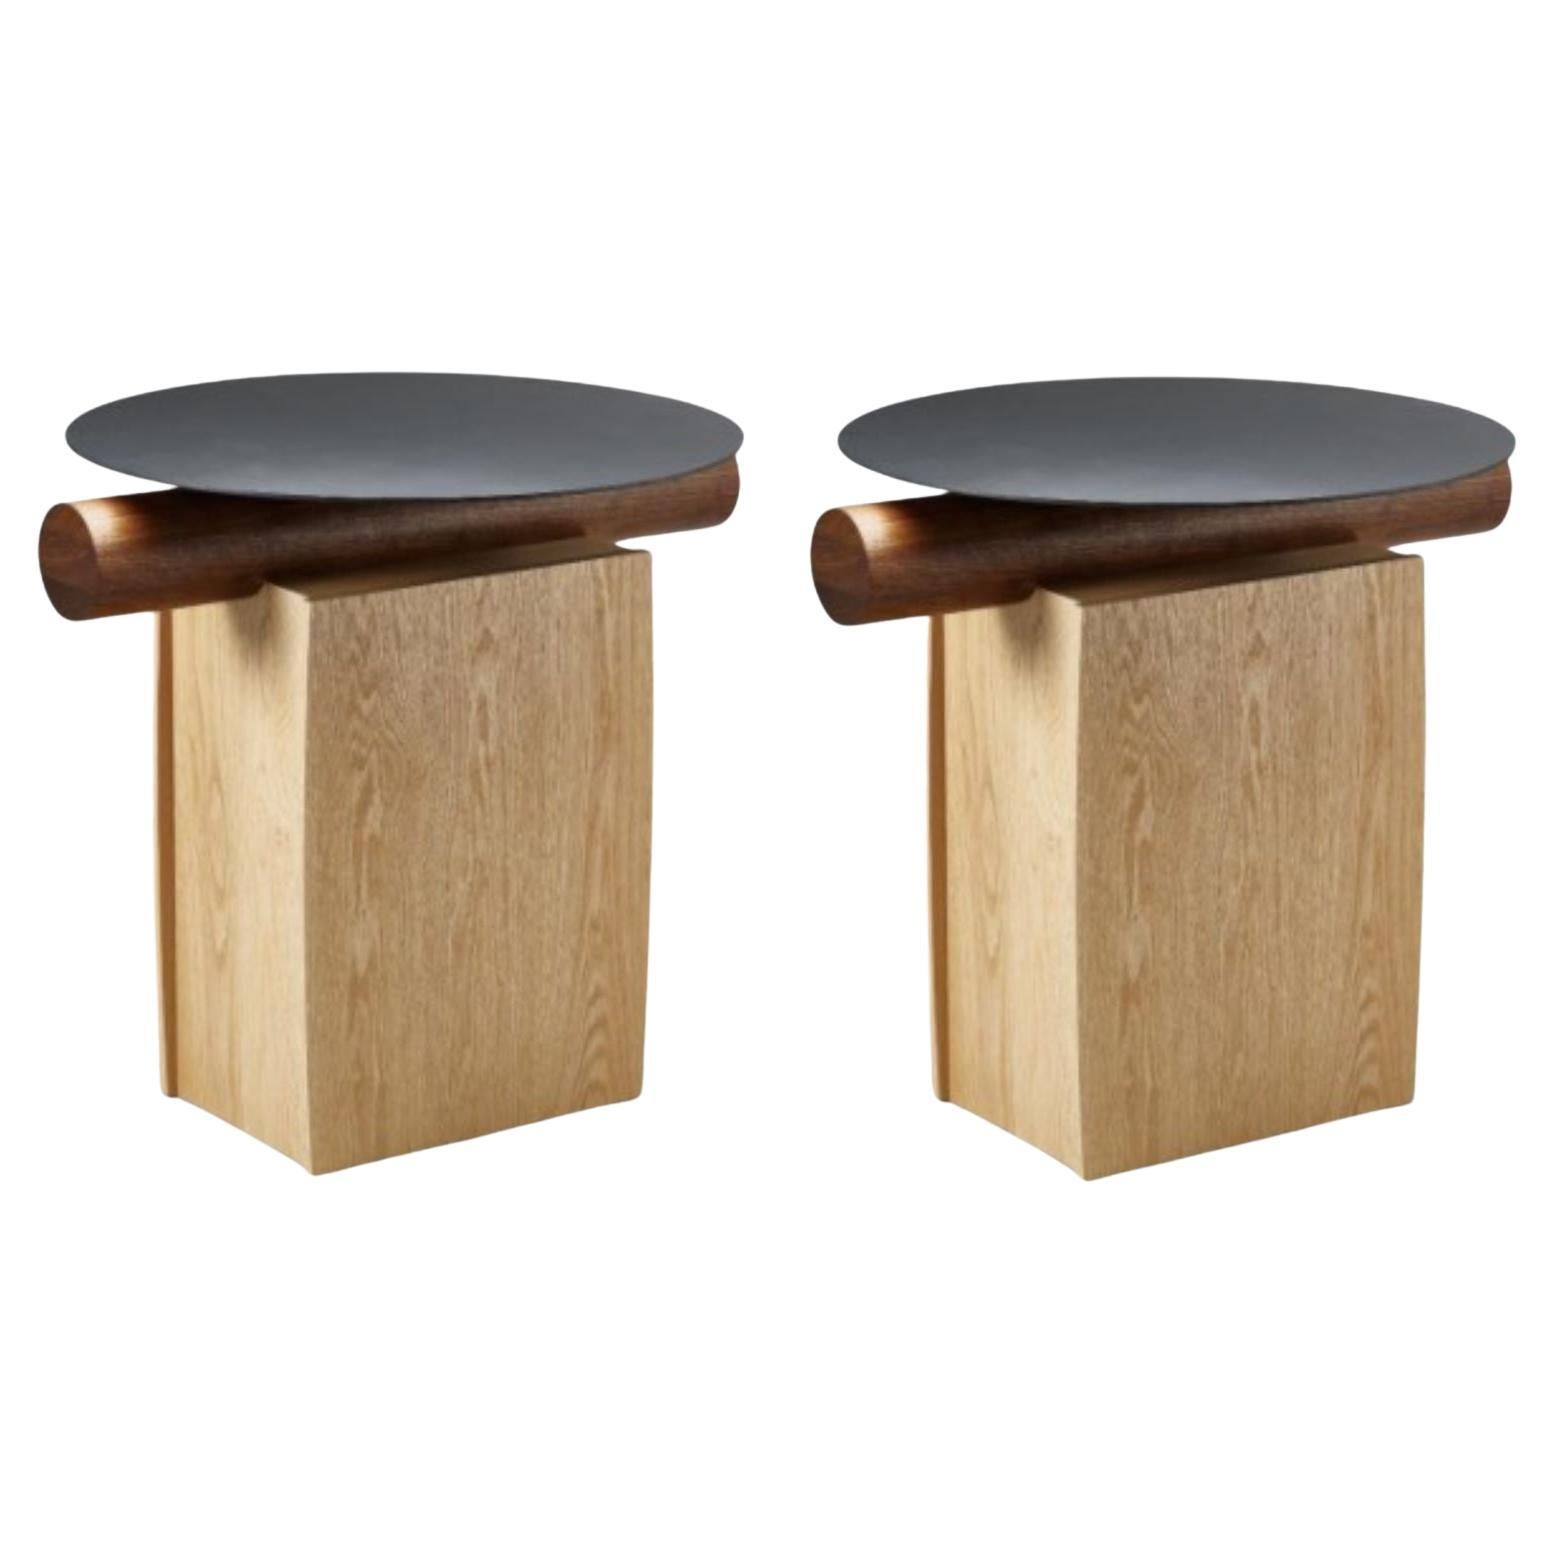 Set of 2 Heritage Round Tables by Lee Jung Hoon